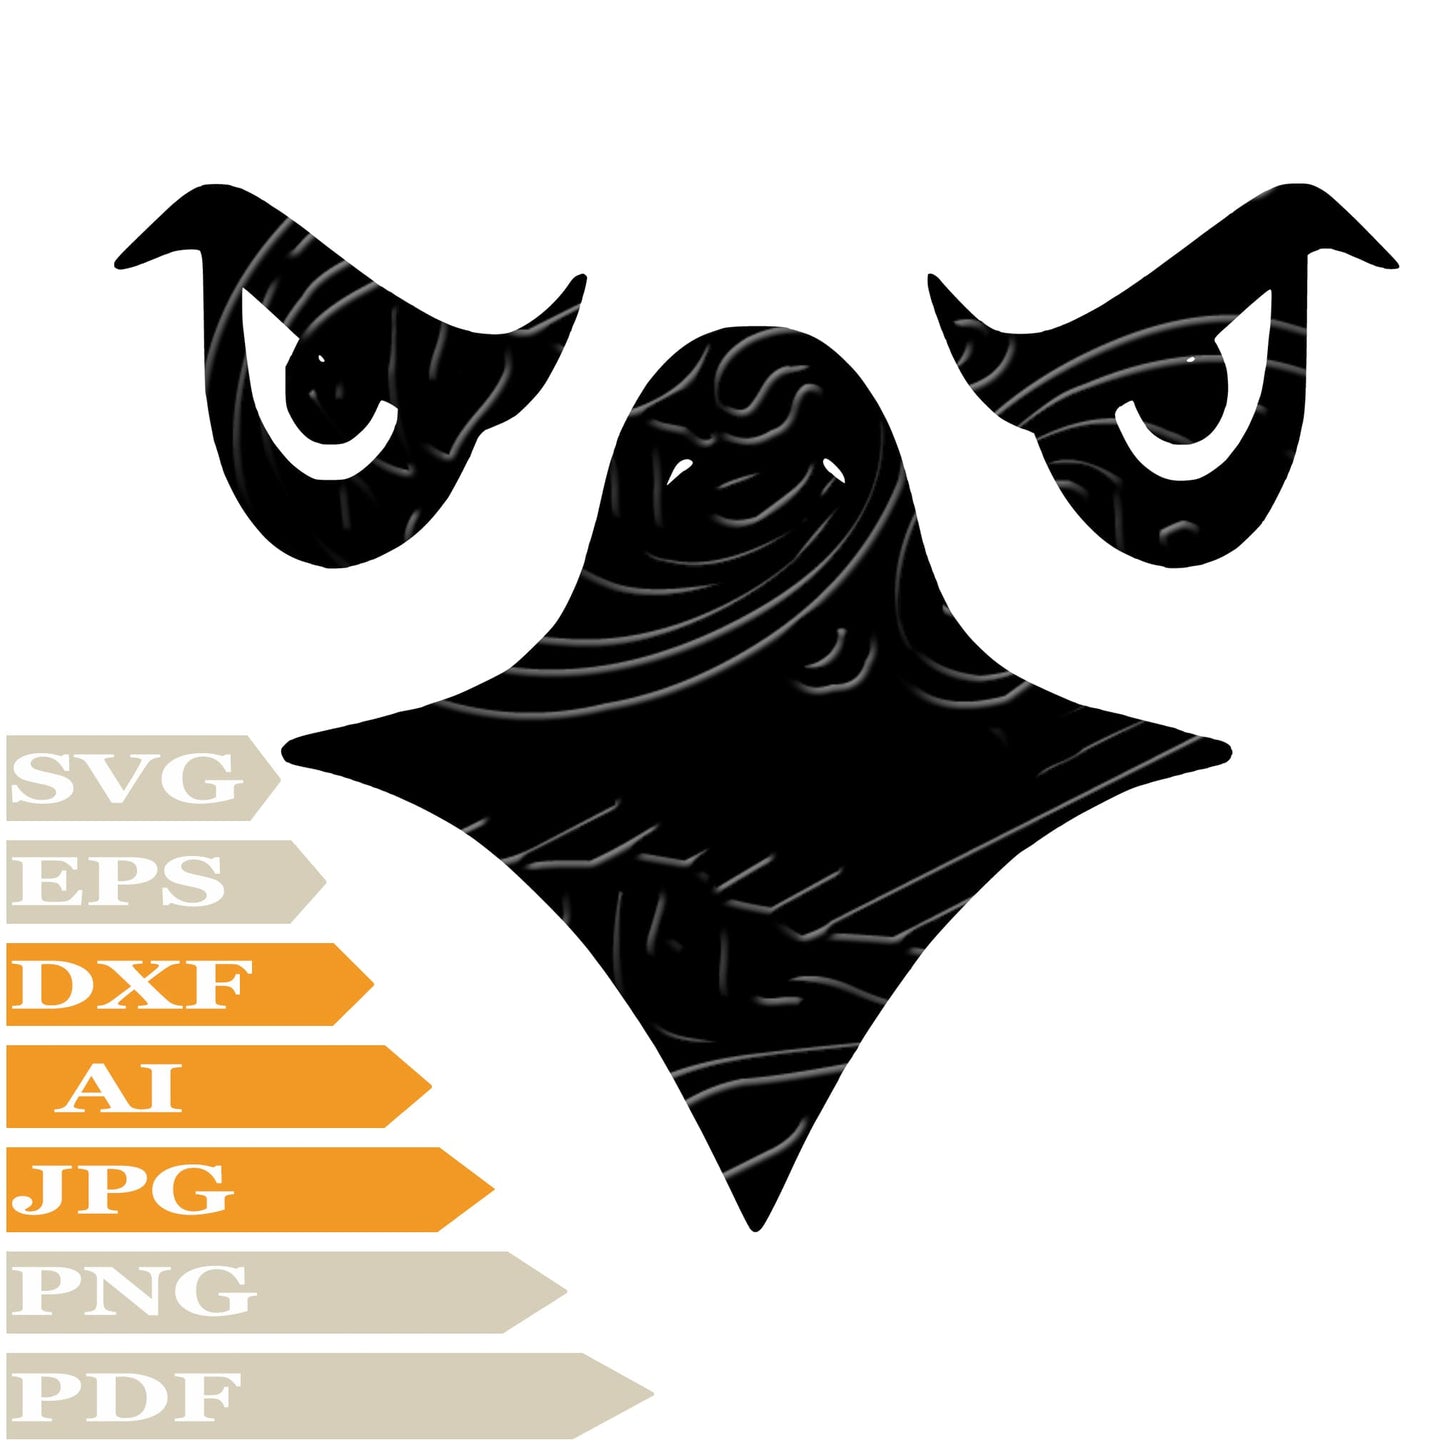 Eagle, Face Angry Eagle Svg File, Image Cut, Png, For Tattoo, Silhouette, Digital Vector Download, Cut File, Clipart, For Cricut